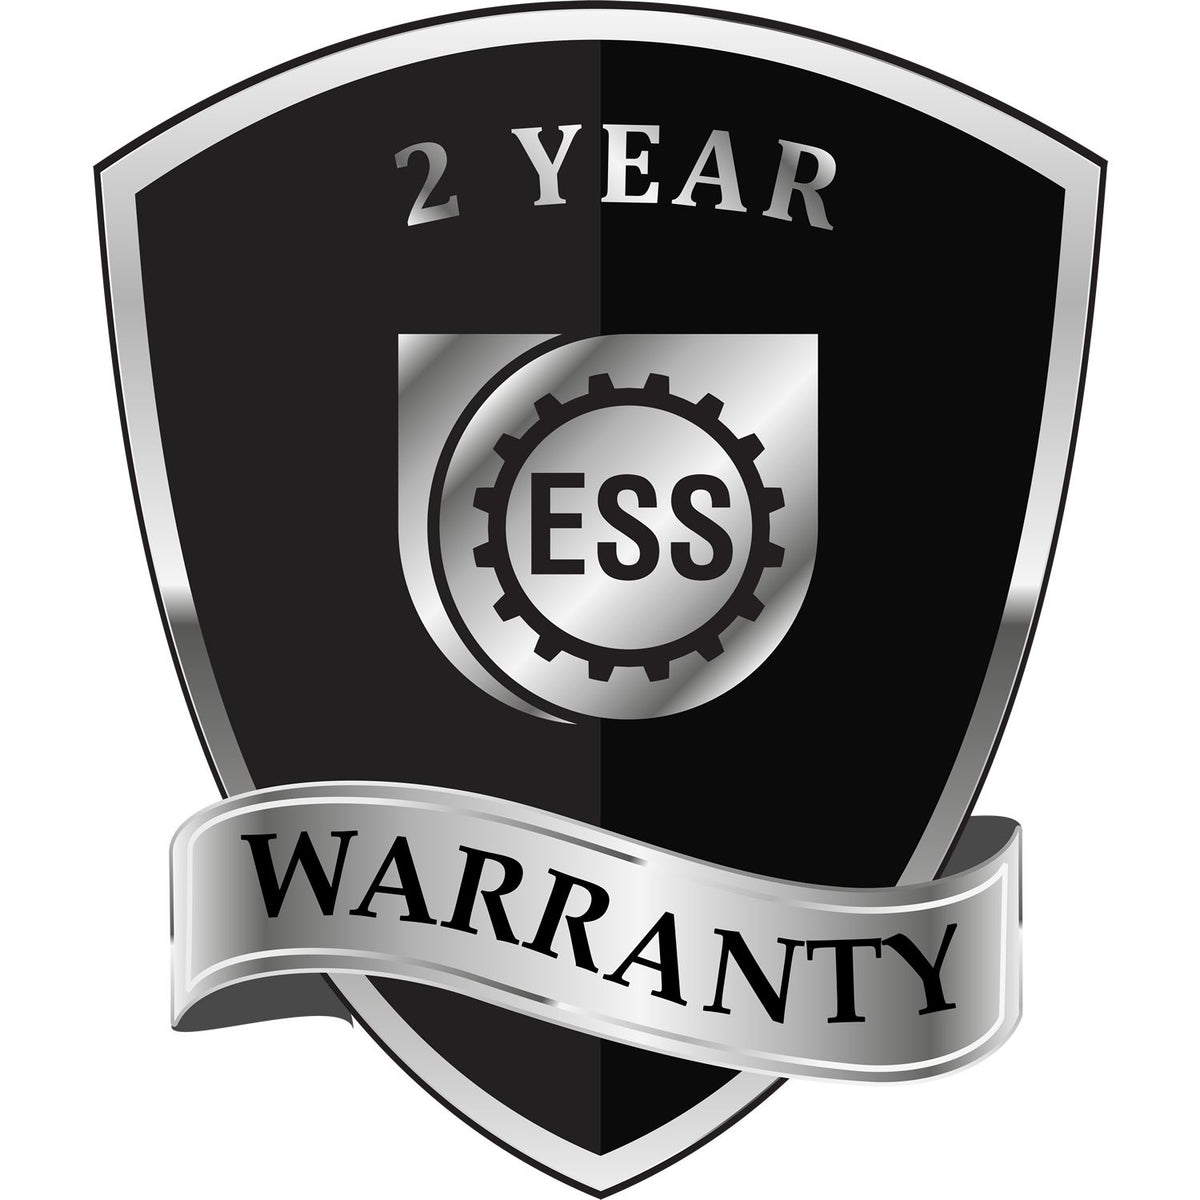 A badge or emblem showing a warranty icon for the Soft New Mexico Professional Engineer Seal